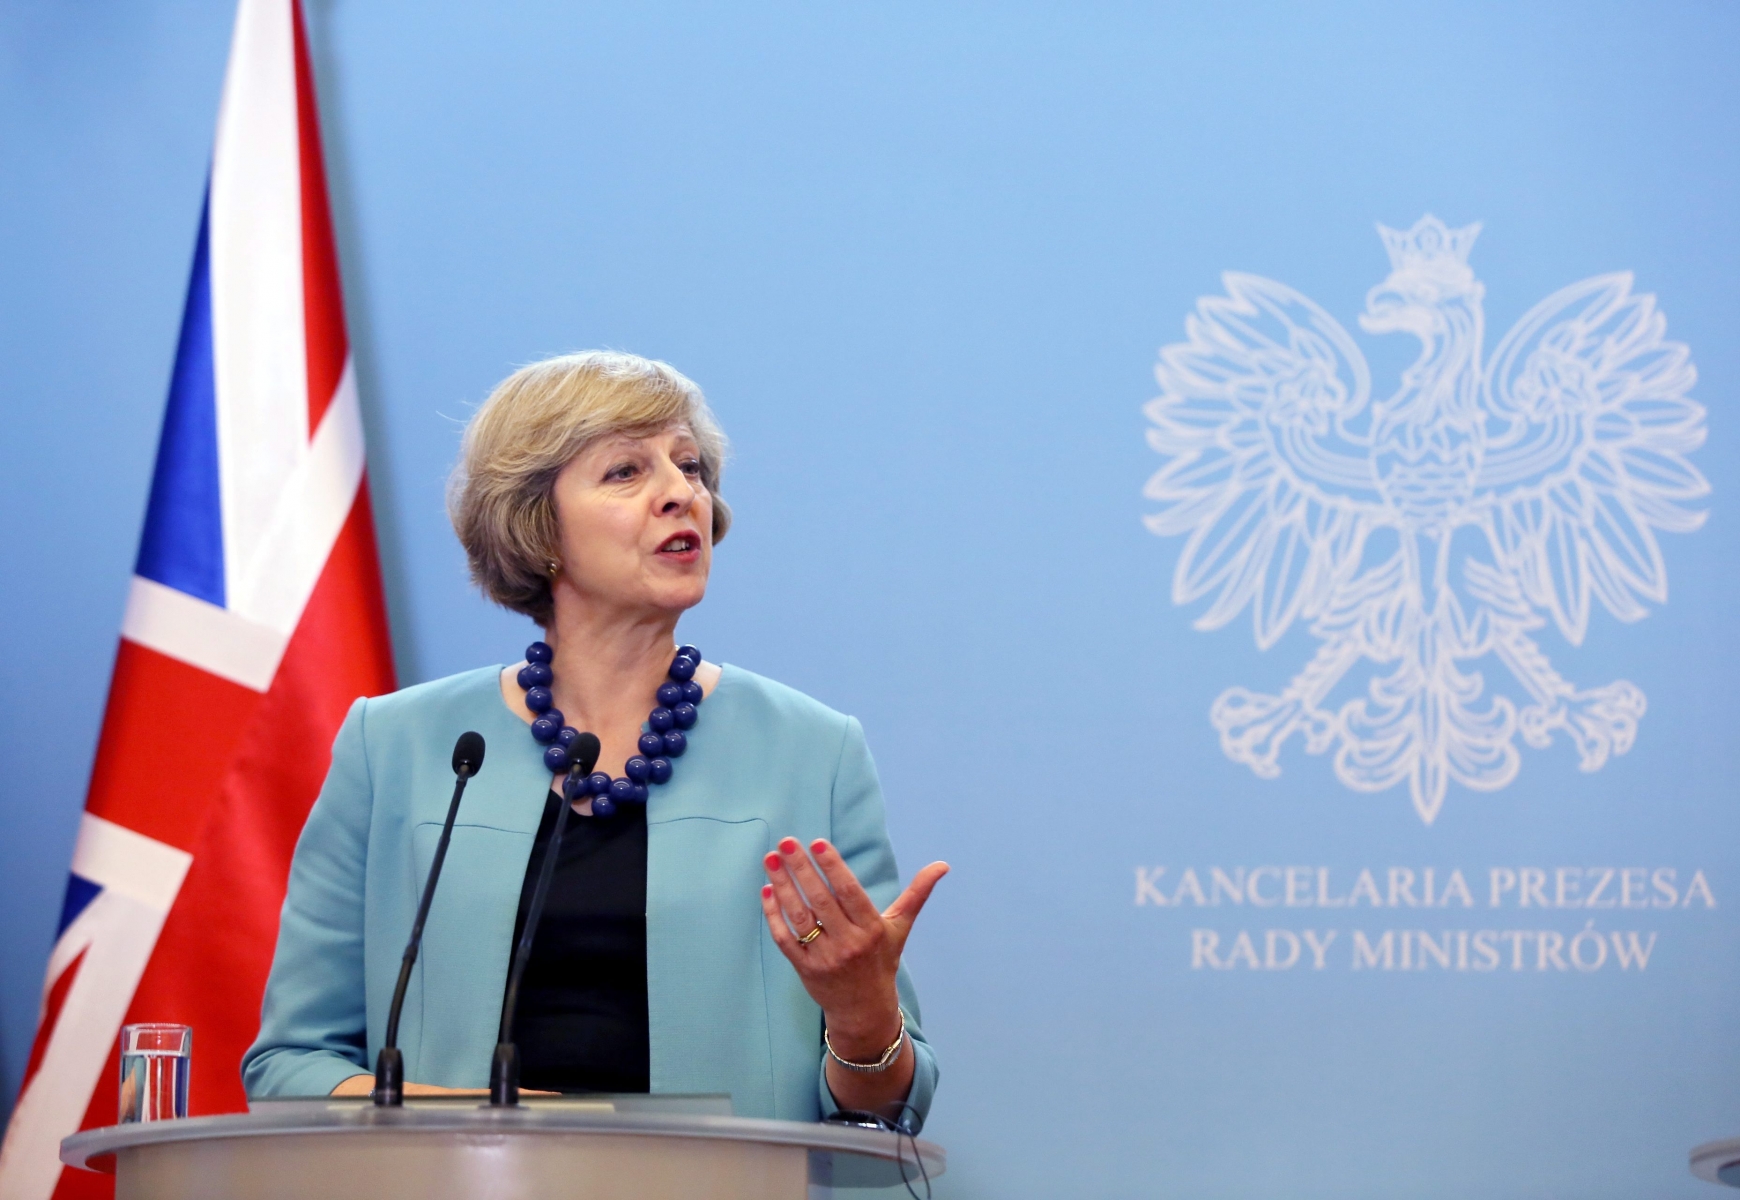 epa05445937 British Prime Minister Theresa May during a press conference after a meeting with Polish Prime Minister Beata Szydlo, in Warsaw, Poland, 28 July 2016. Polish and British Prime Ministers discussed bilateral relations and the situation of Poles in Britain after the Brexit referendum.  EPA/TOMASZ GZELL POLAND OUT POLAND BRITAIN DIPLOMACY